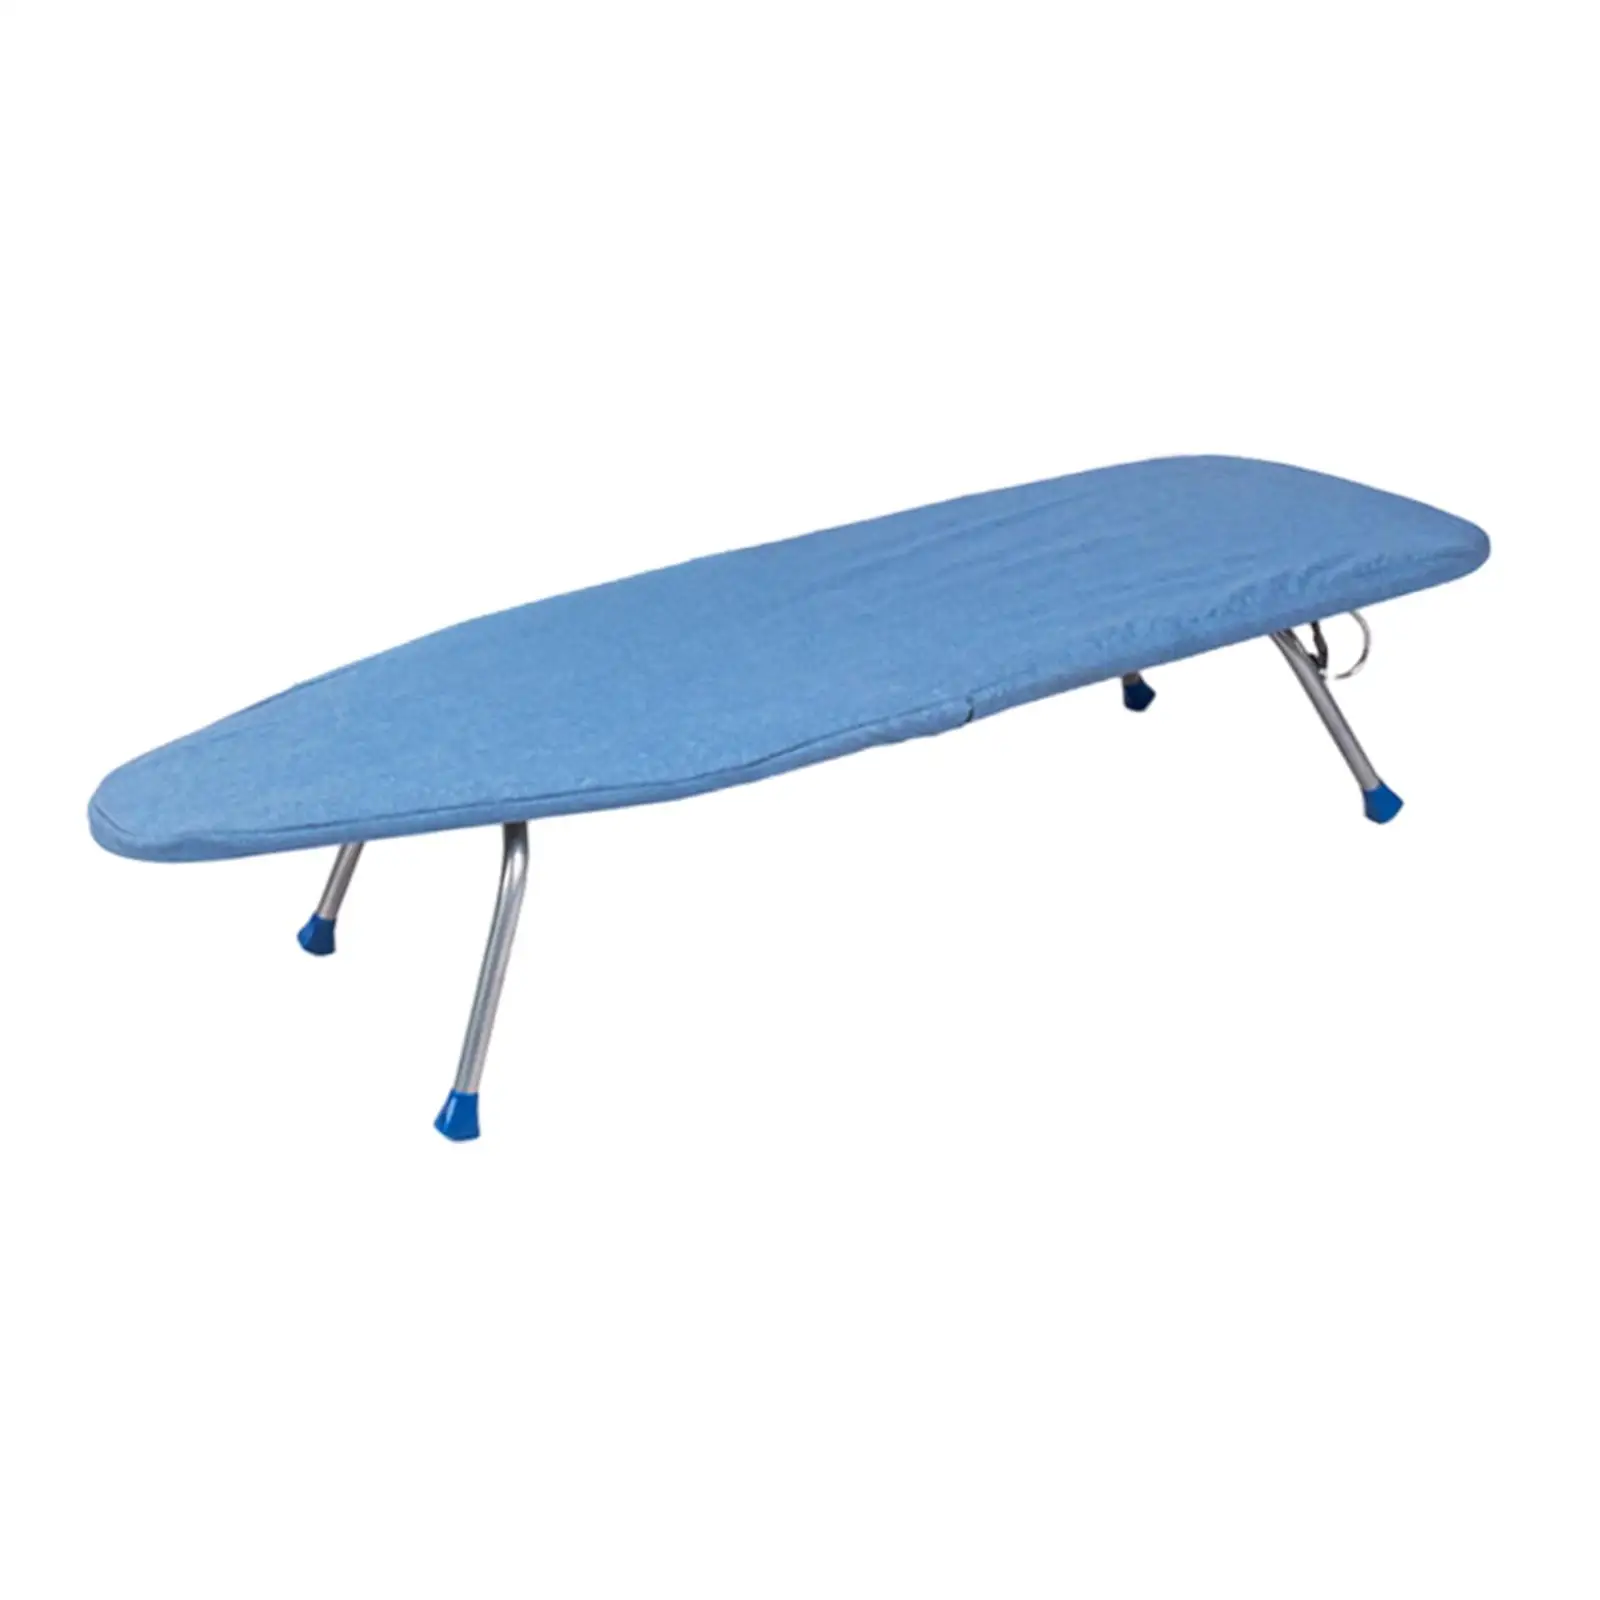 Tabletop Ironing Board Heat Resistant Cover Space Saving Portable Ironing Table for Household Travel Laundry Room Sewing